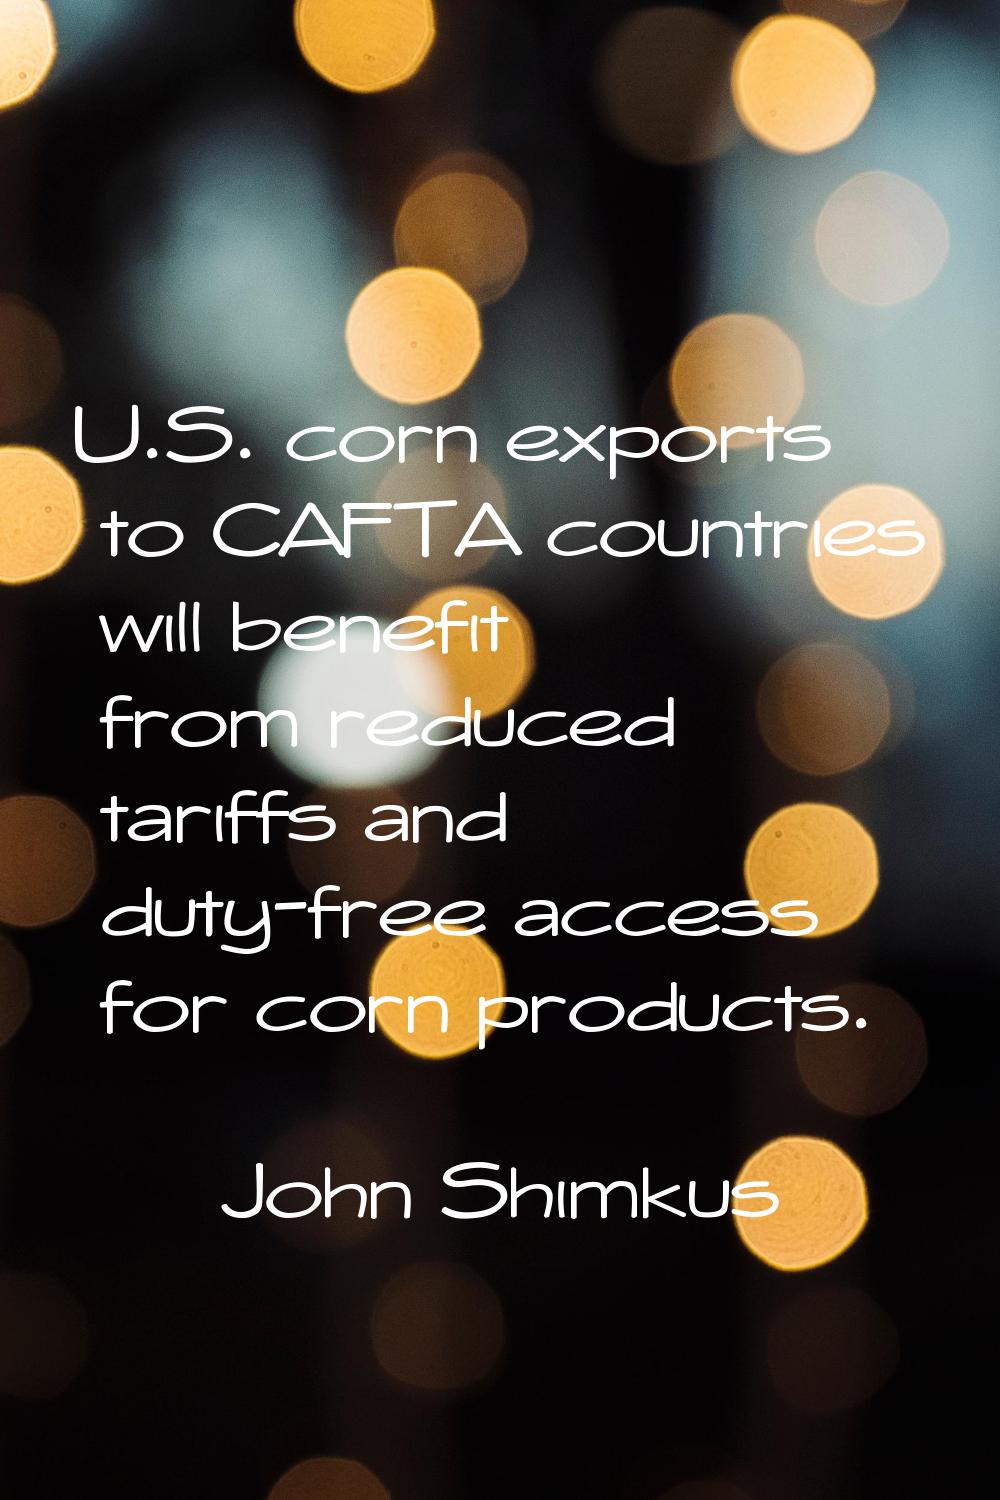 U.S. corn exports to CAFTA countries will benefit from reduced tariffs and duty-free access for cor